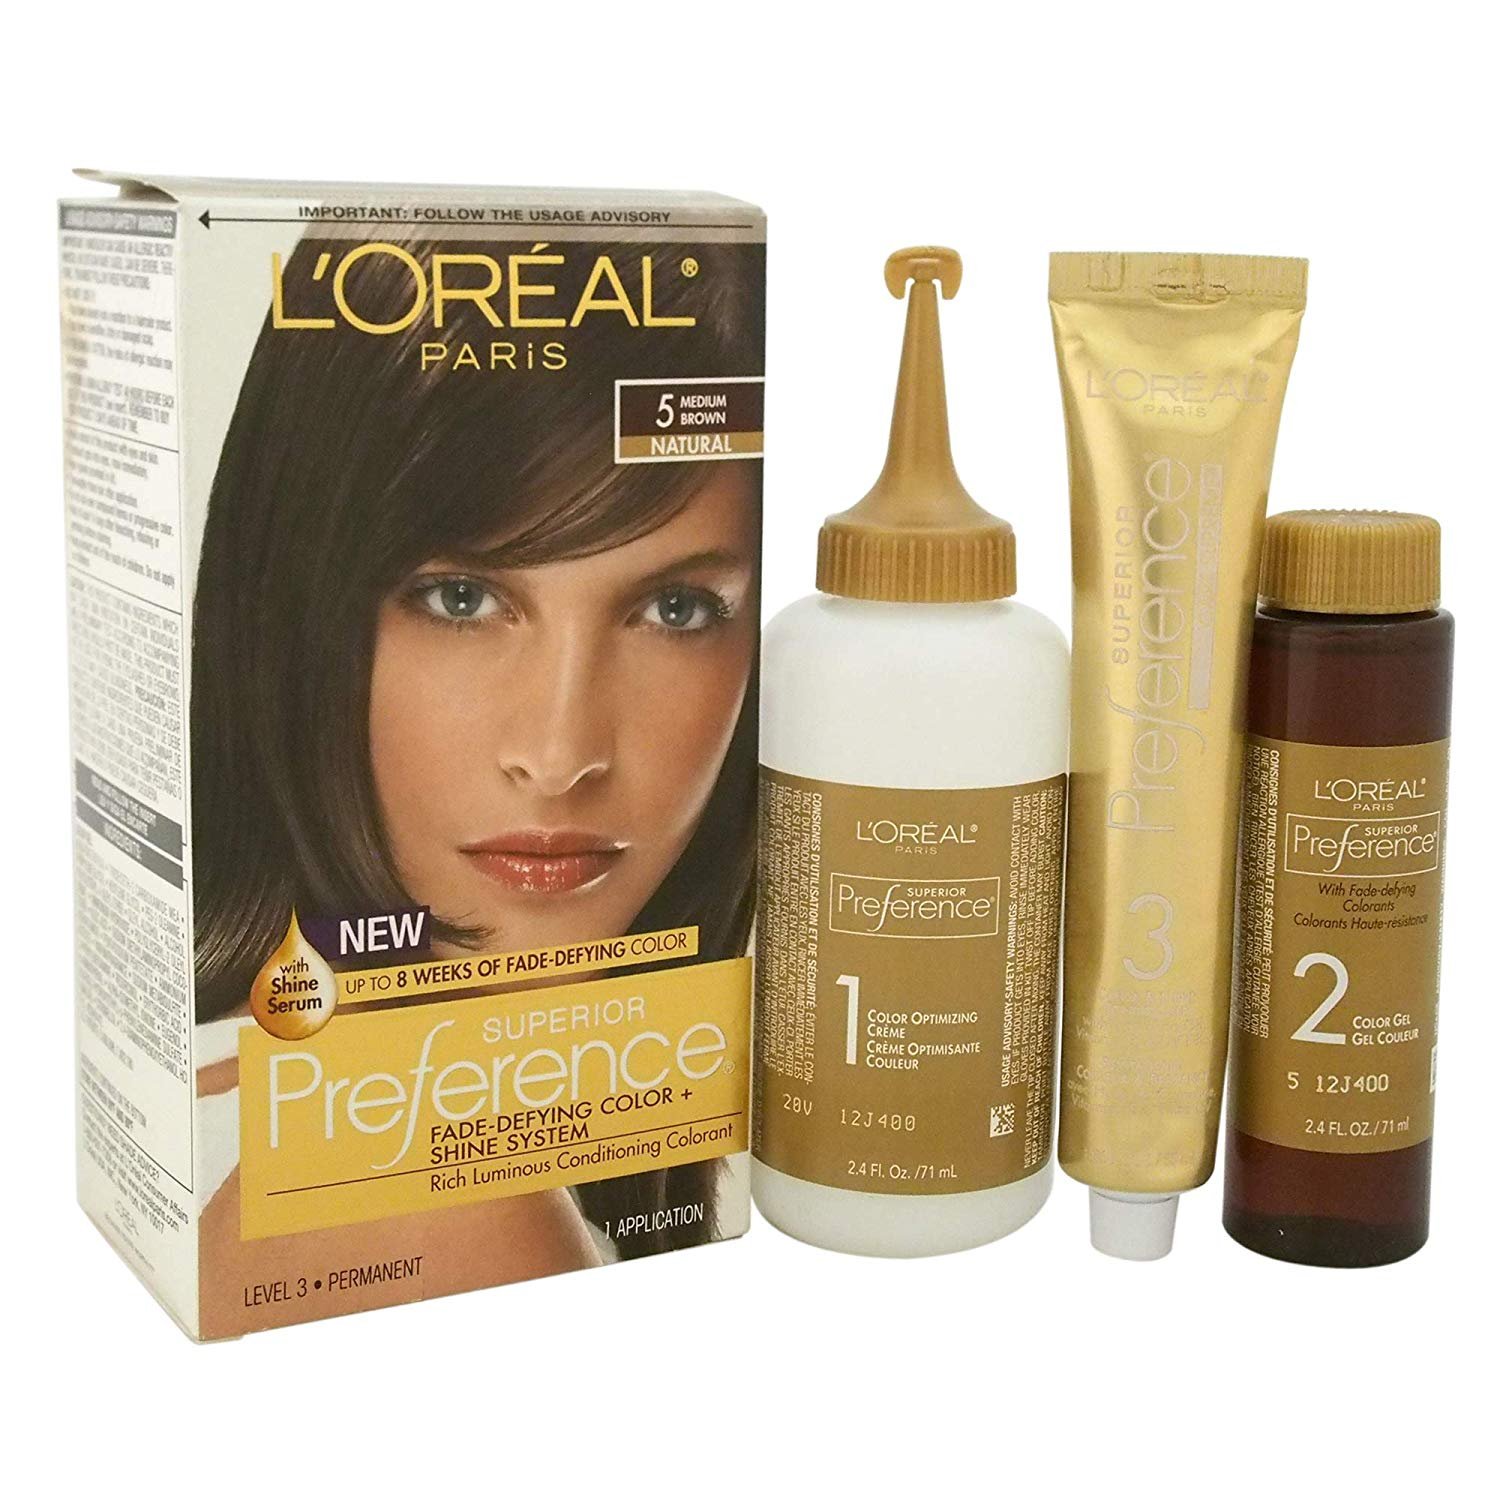 L'Oreal Paris Superior Preference Permanent Hair Color, 5 Medium Brown, 1 Each - image 4 of 7